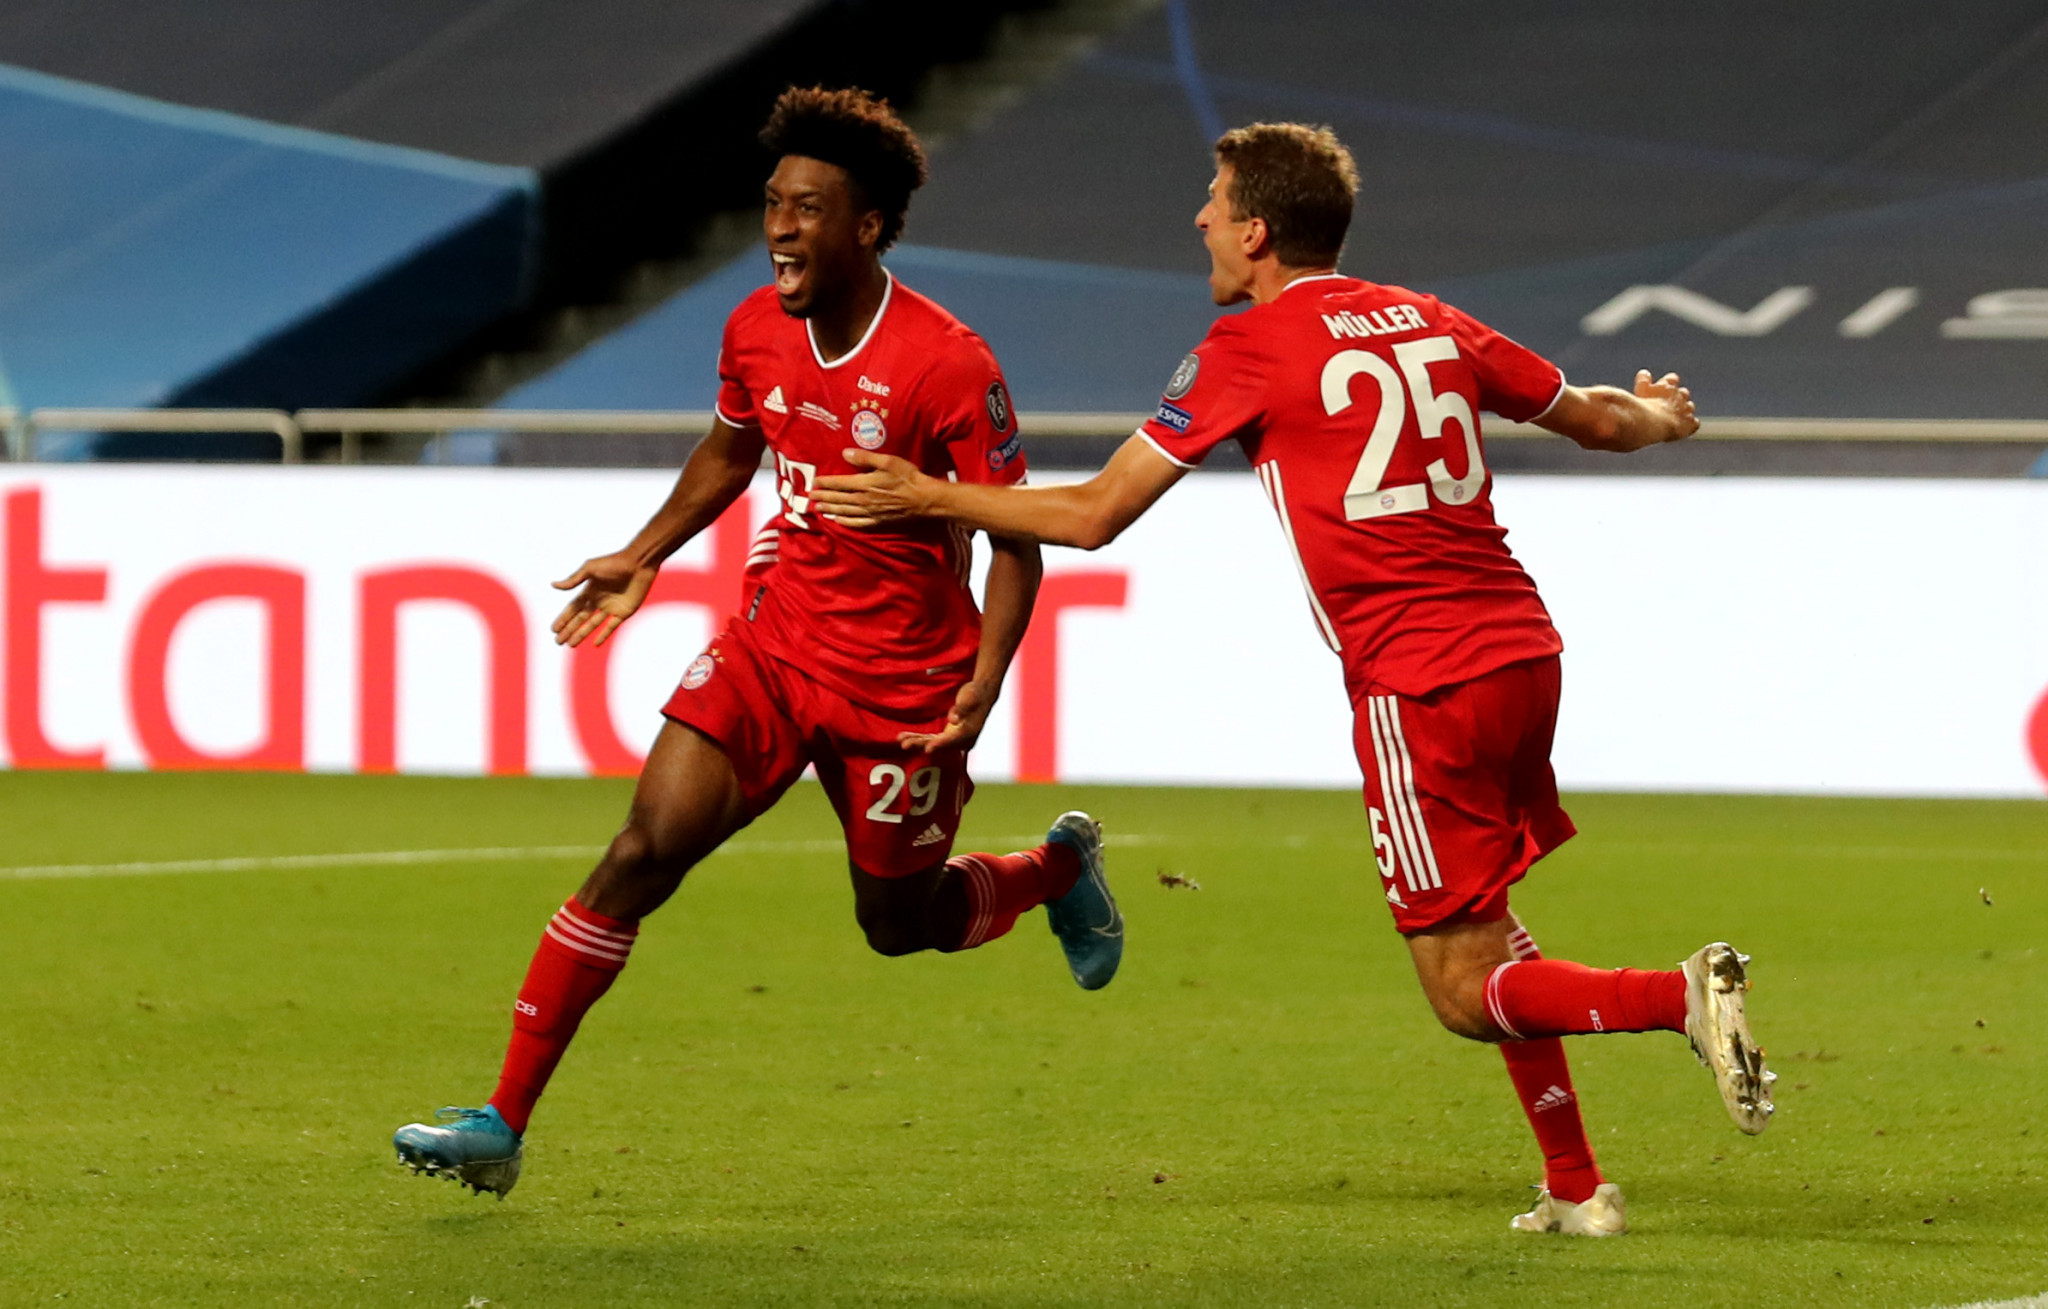 Bayern Munich's Kingsley Coman celebrates after scoring the winning goal in the UEFA Champions League final against Paris Saint-Germain ©Getty Images